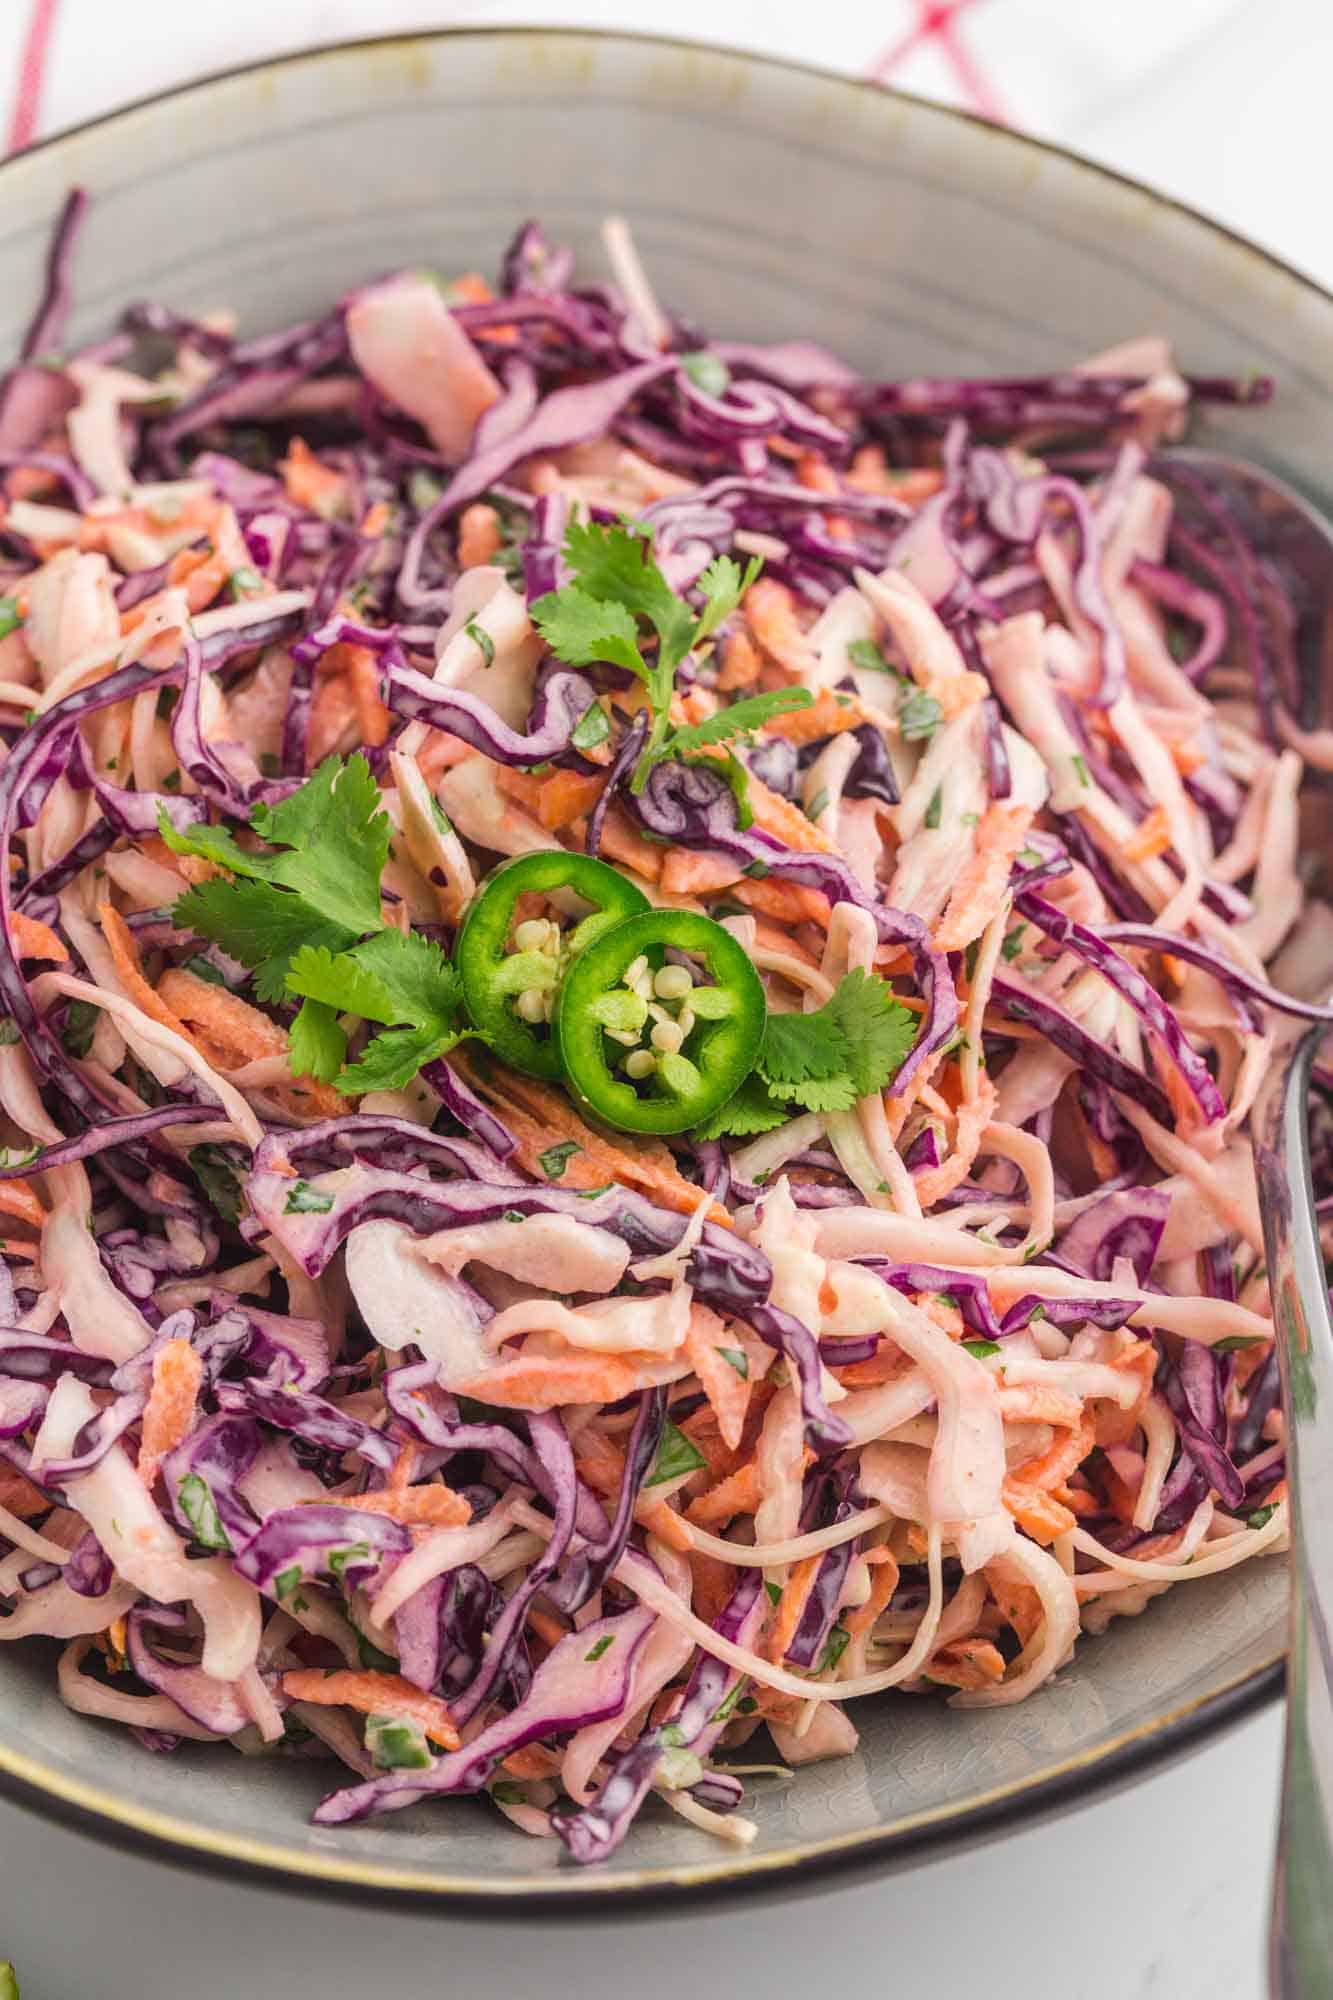 cabbage slaw topped with jalapeno and cilantro